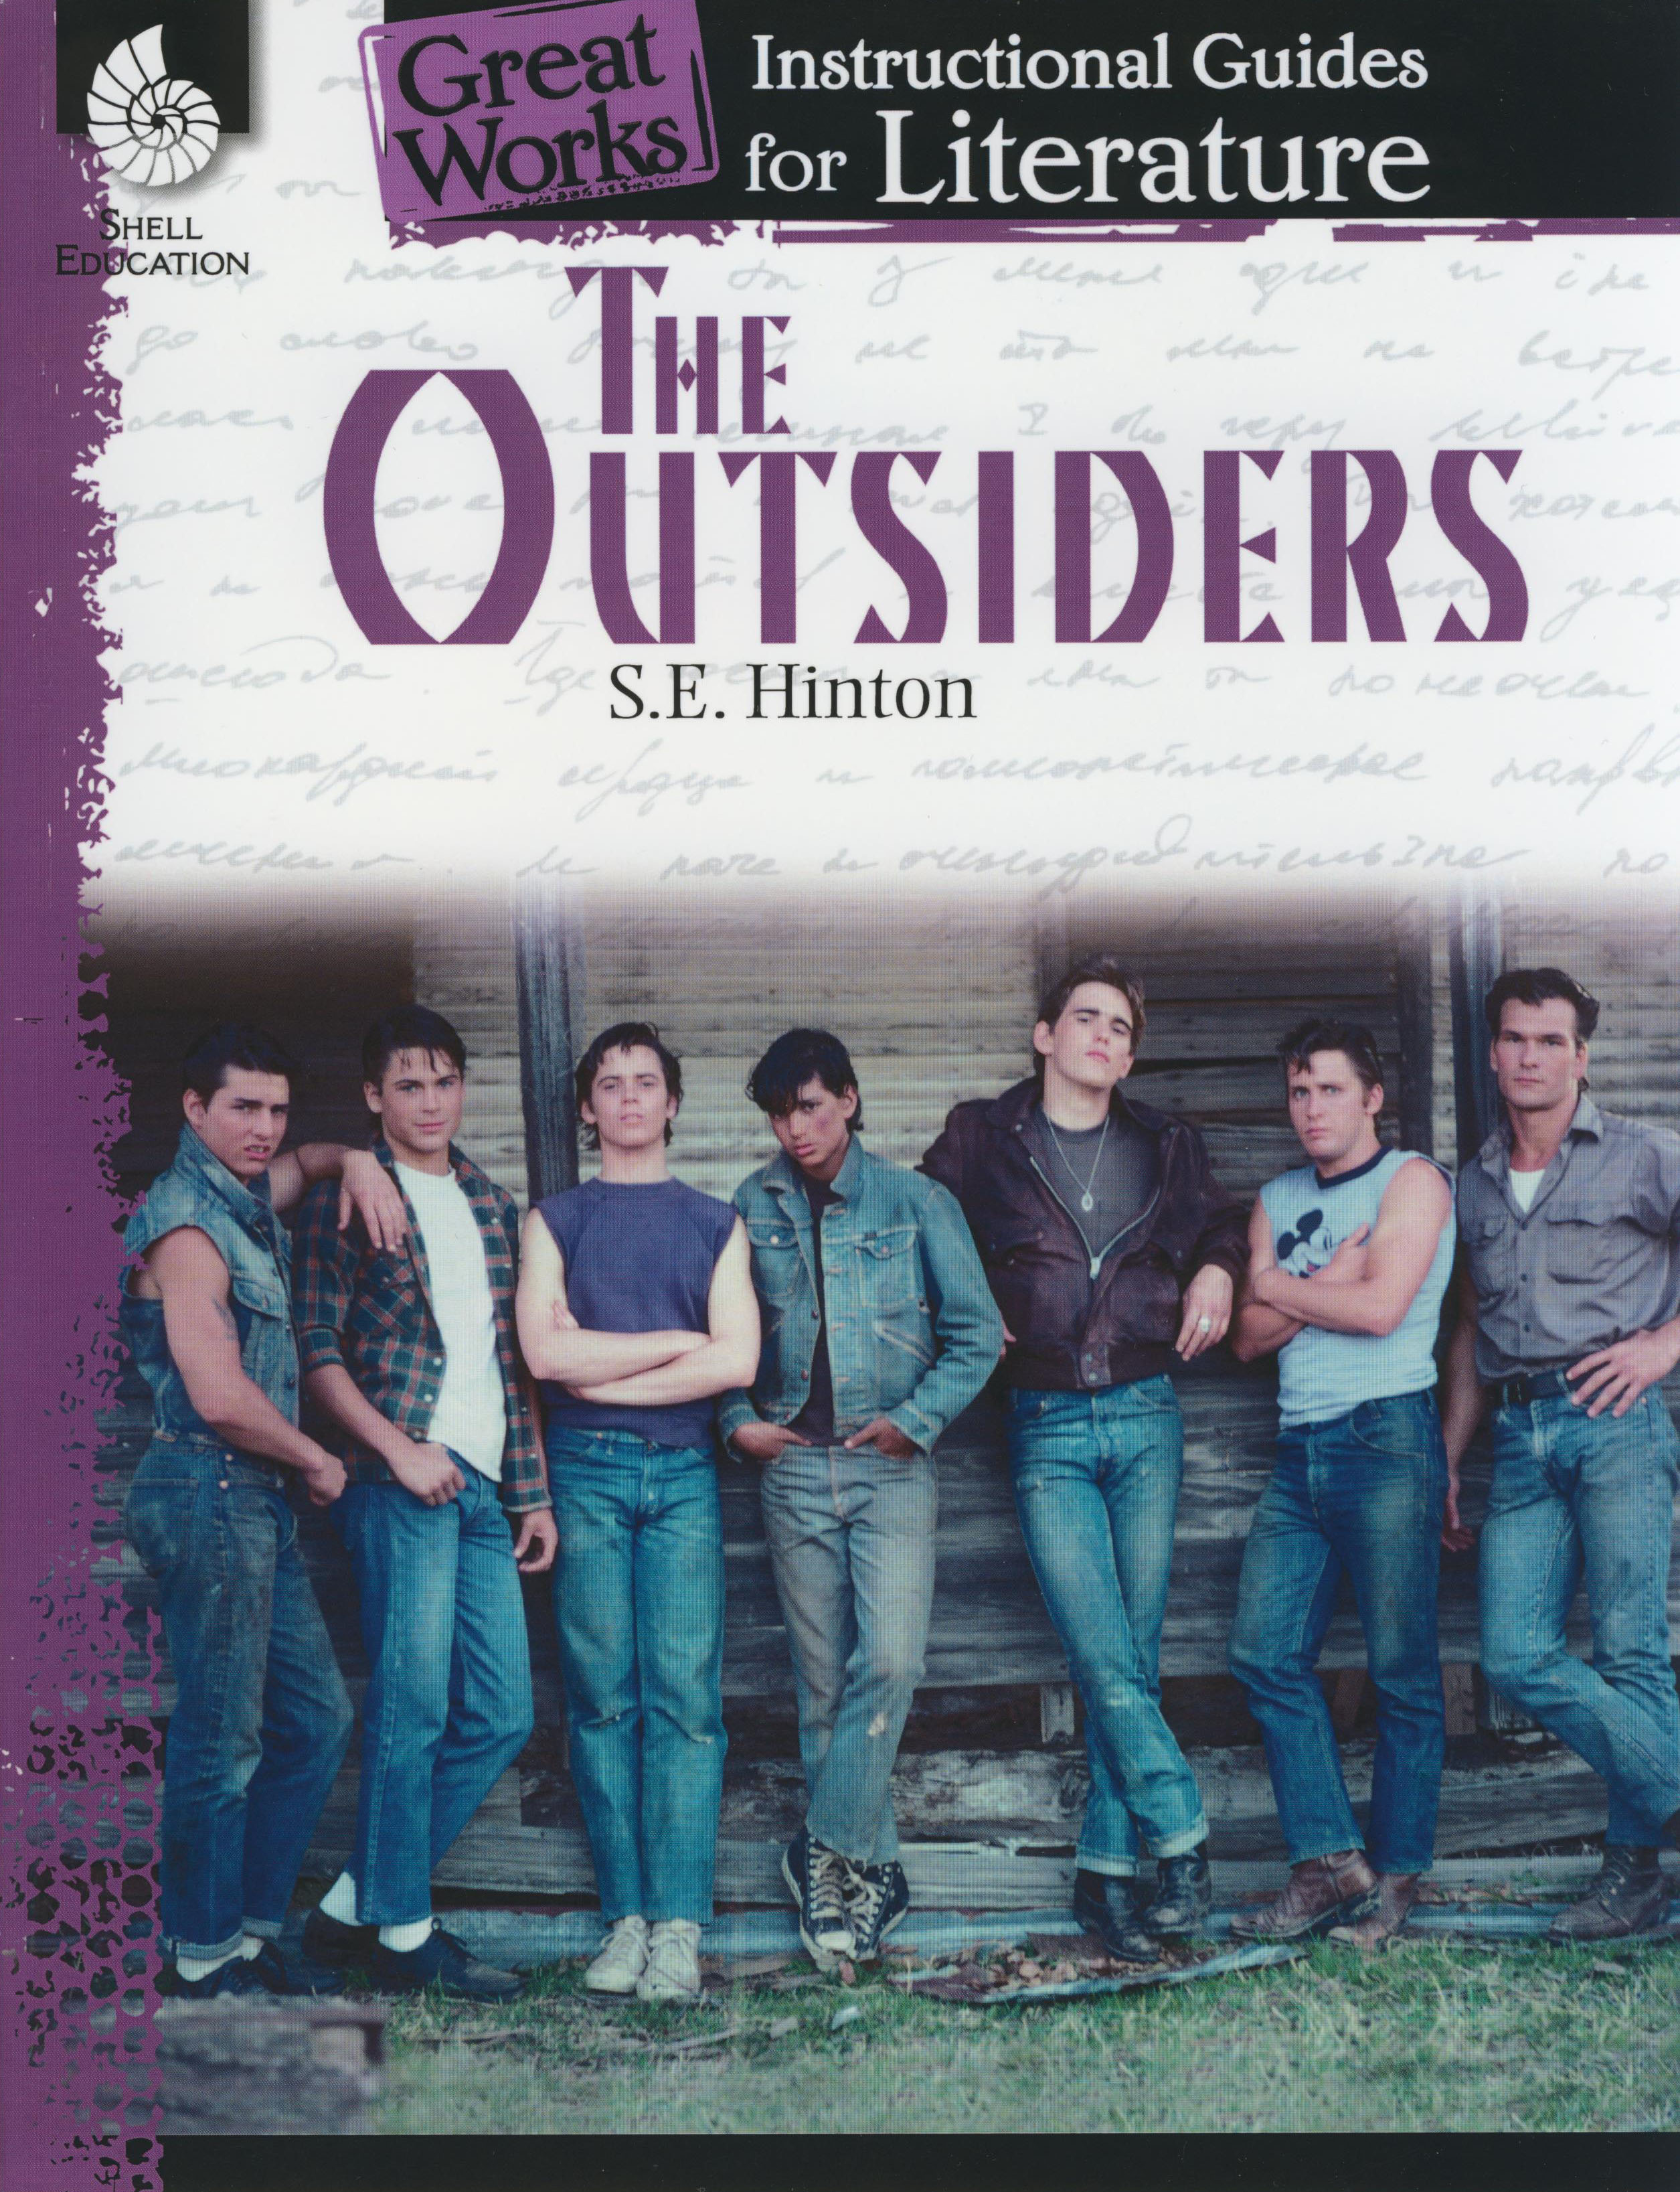 Great Works Instructional Guide for Literature: The Outsiders